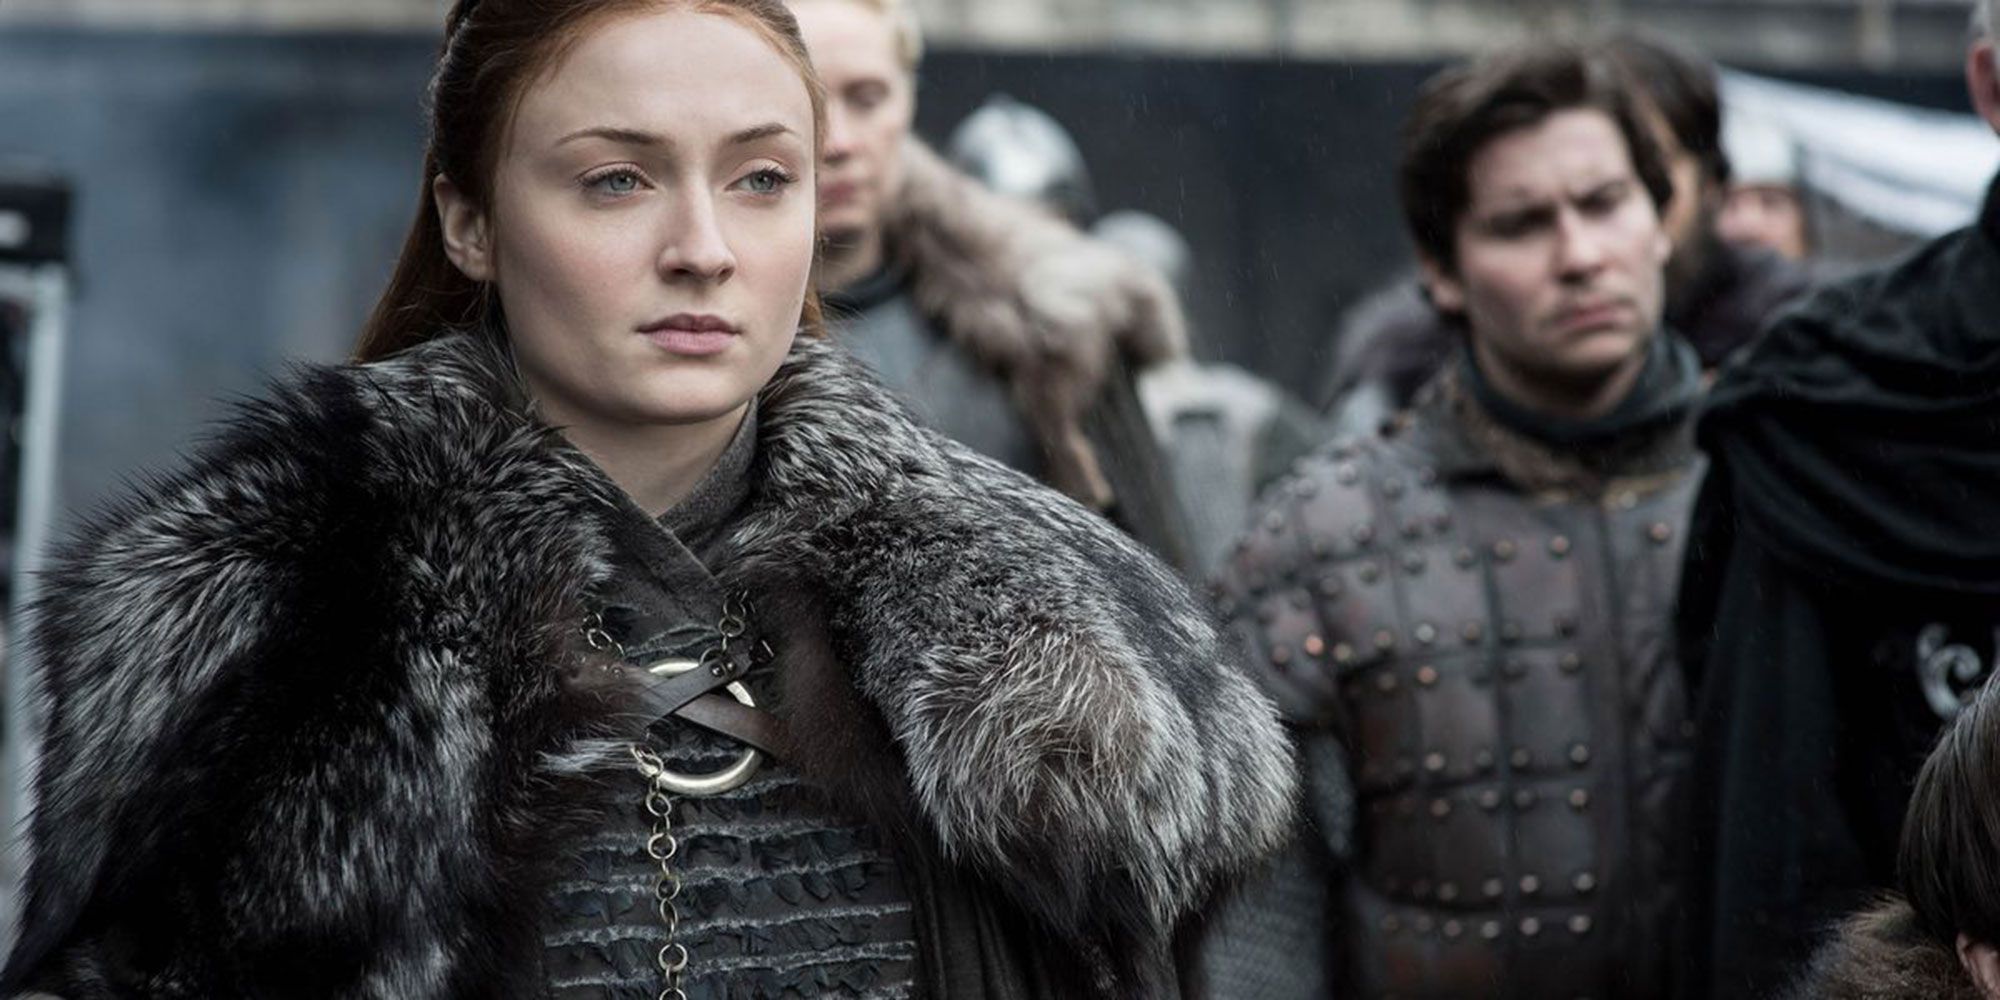 Which Marvel/Star Wars/Game Of Thrones Hybrid Character Are You? Sansa Stark